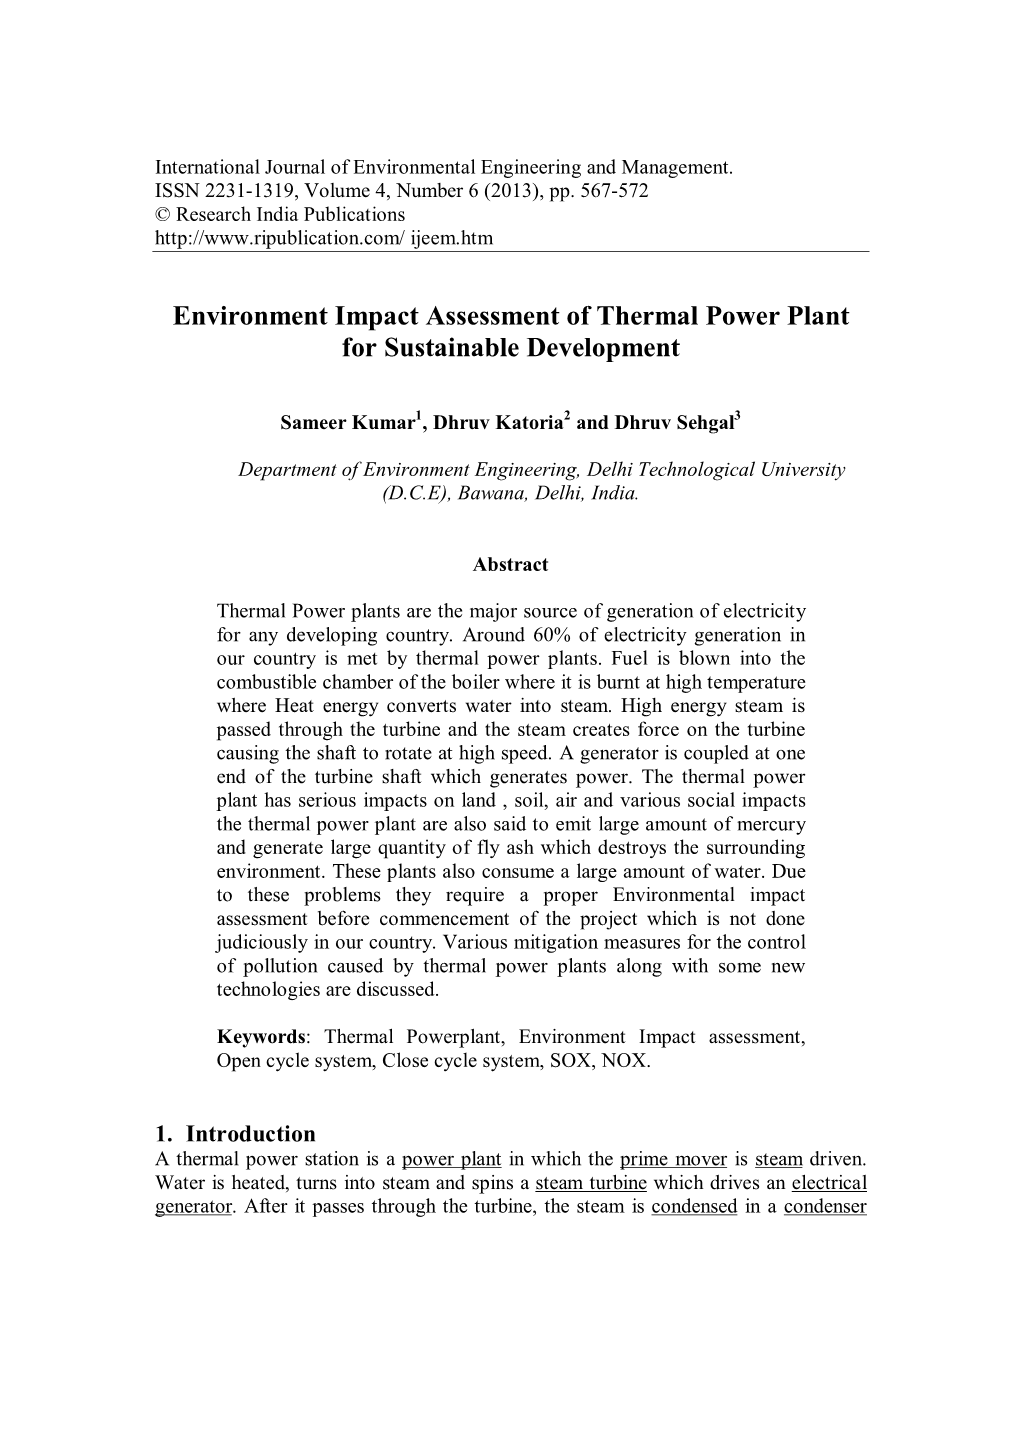 Environment Impact Assessment of Thermal Power Plant for Sustainable Development